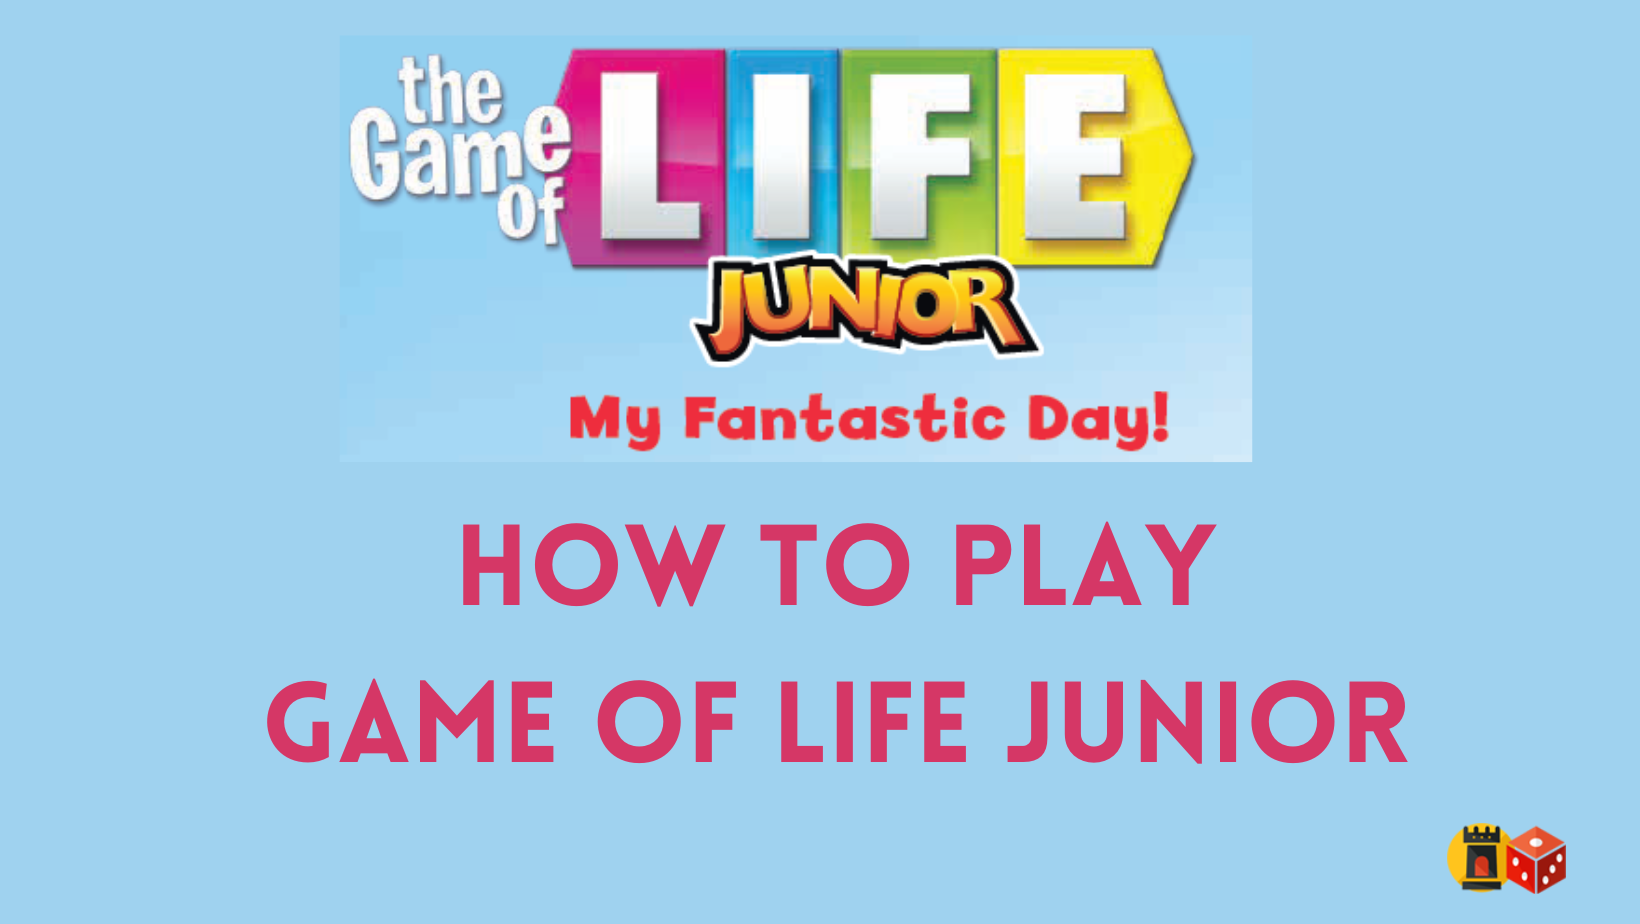 How to play Game of Life Junior